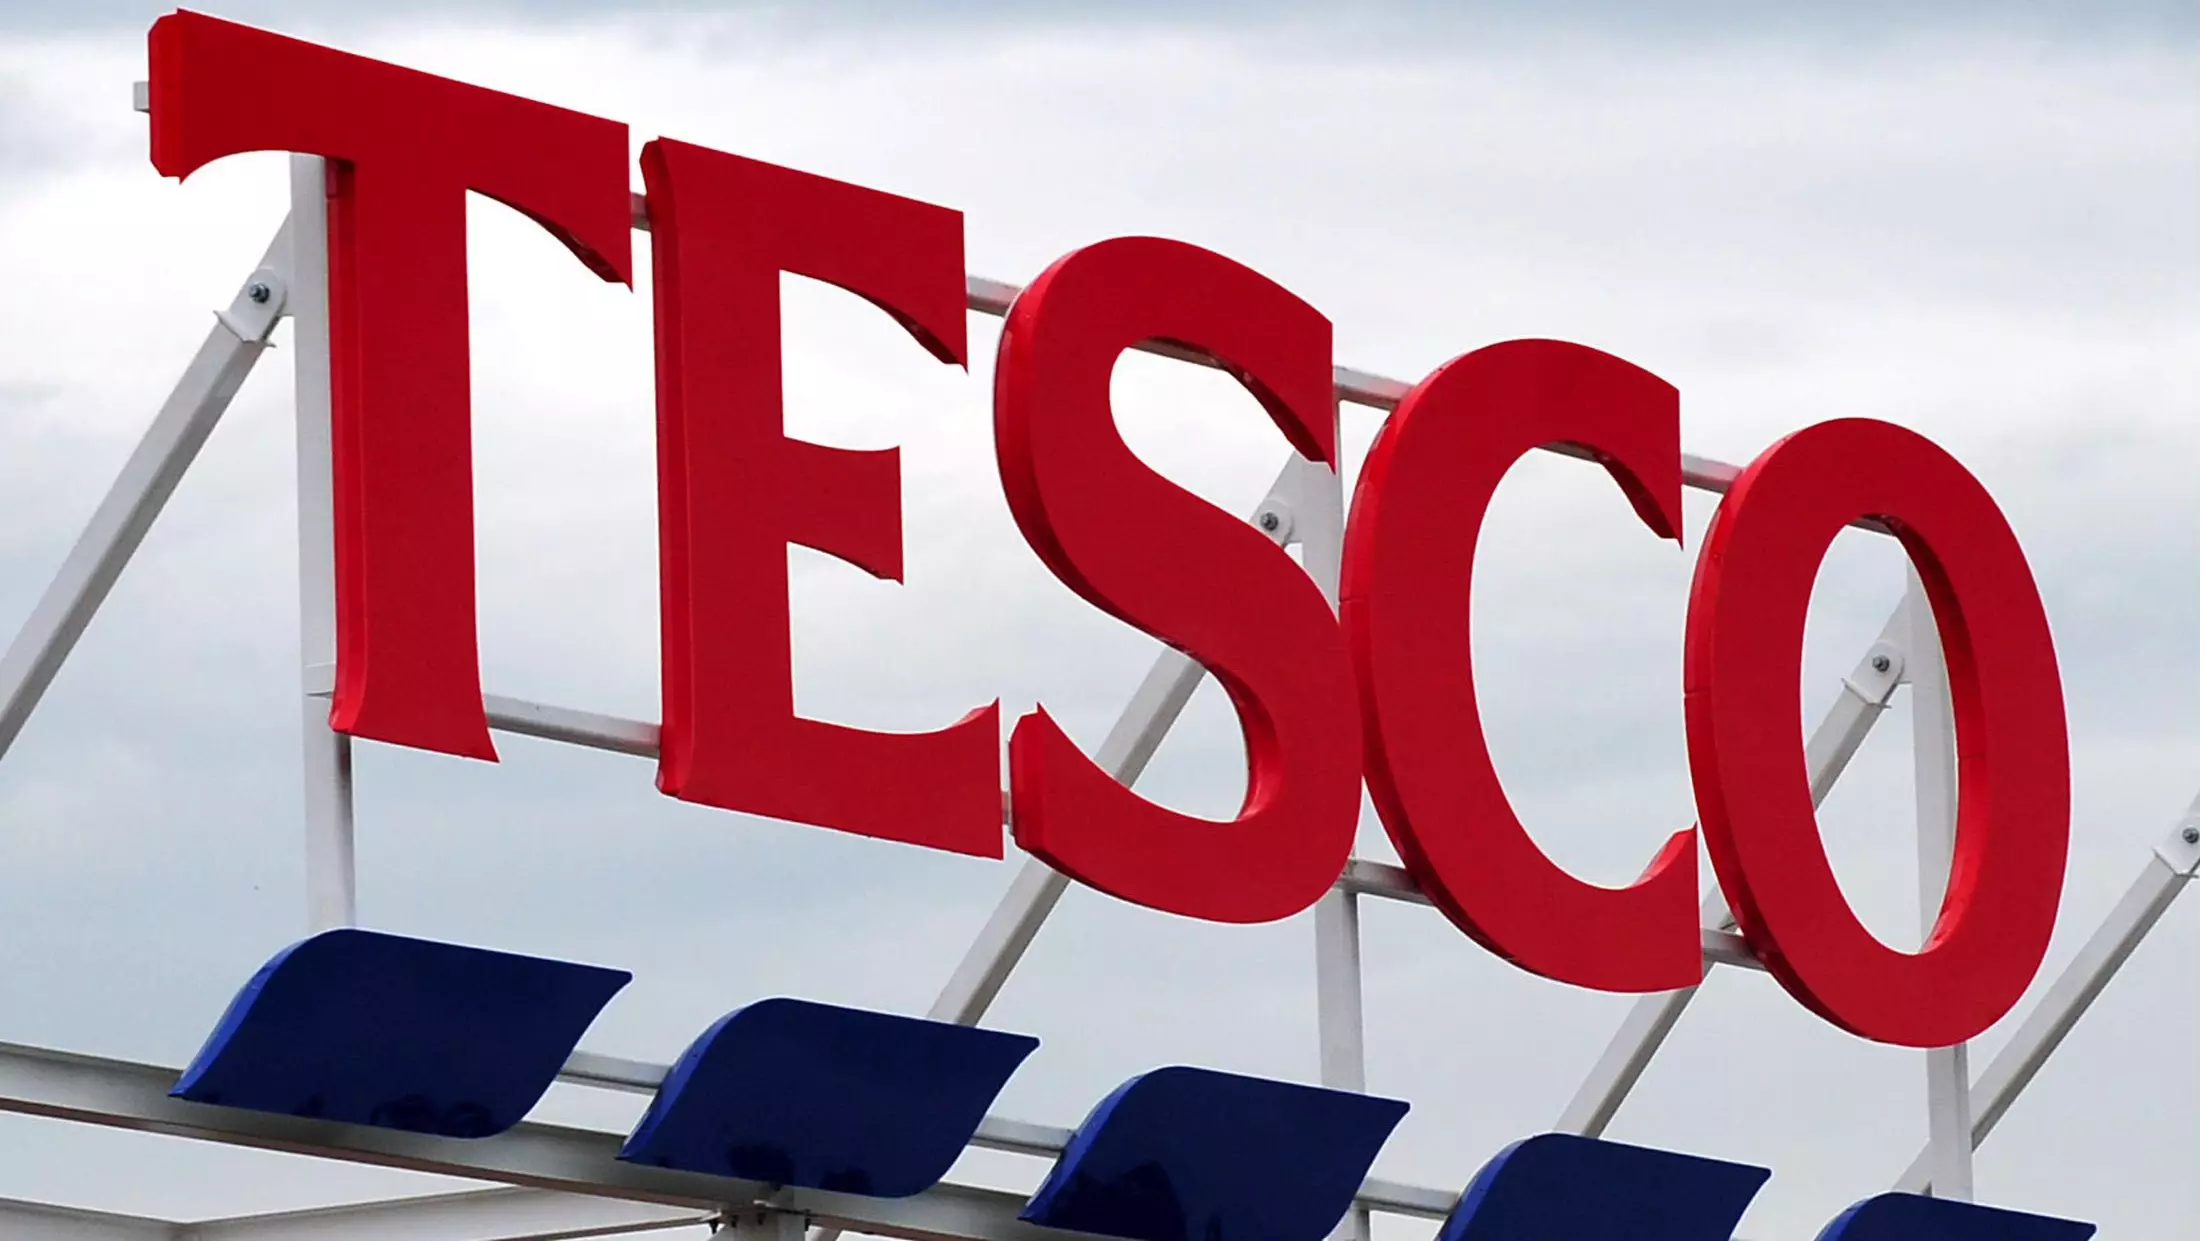 There's Been An Upgrade To The Tesco Meal Deal, And It's Fancy 